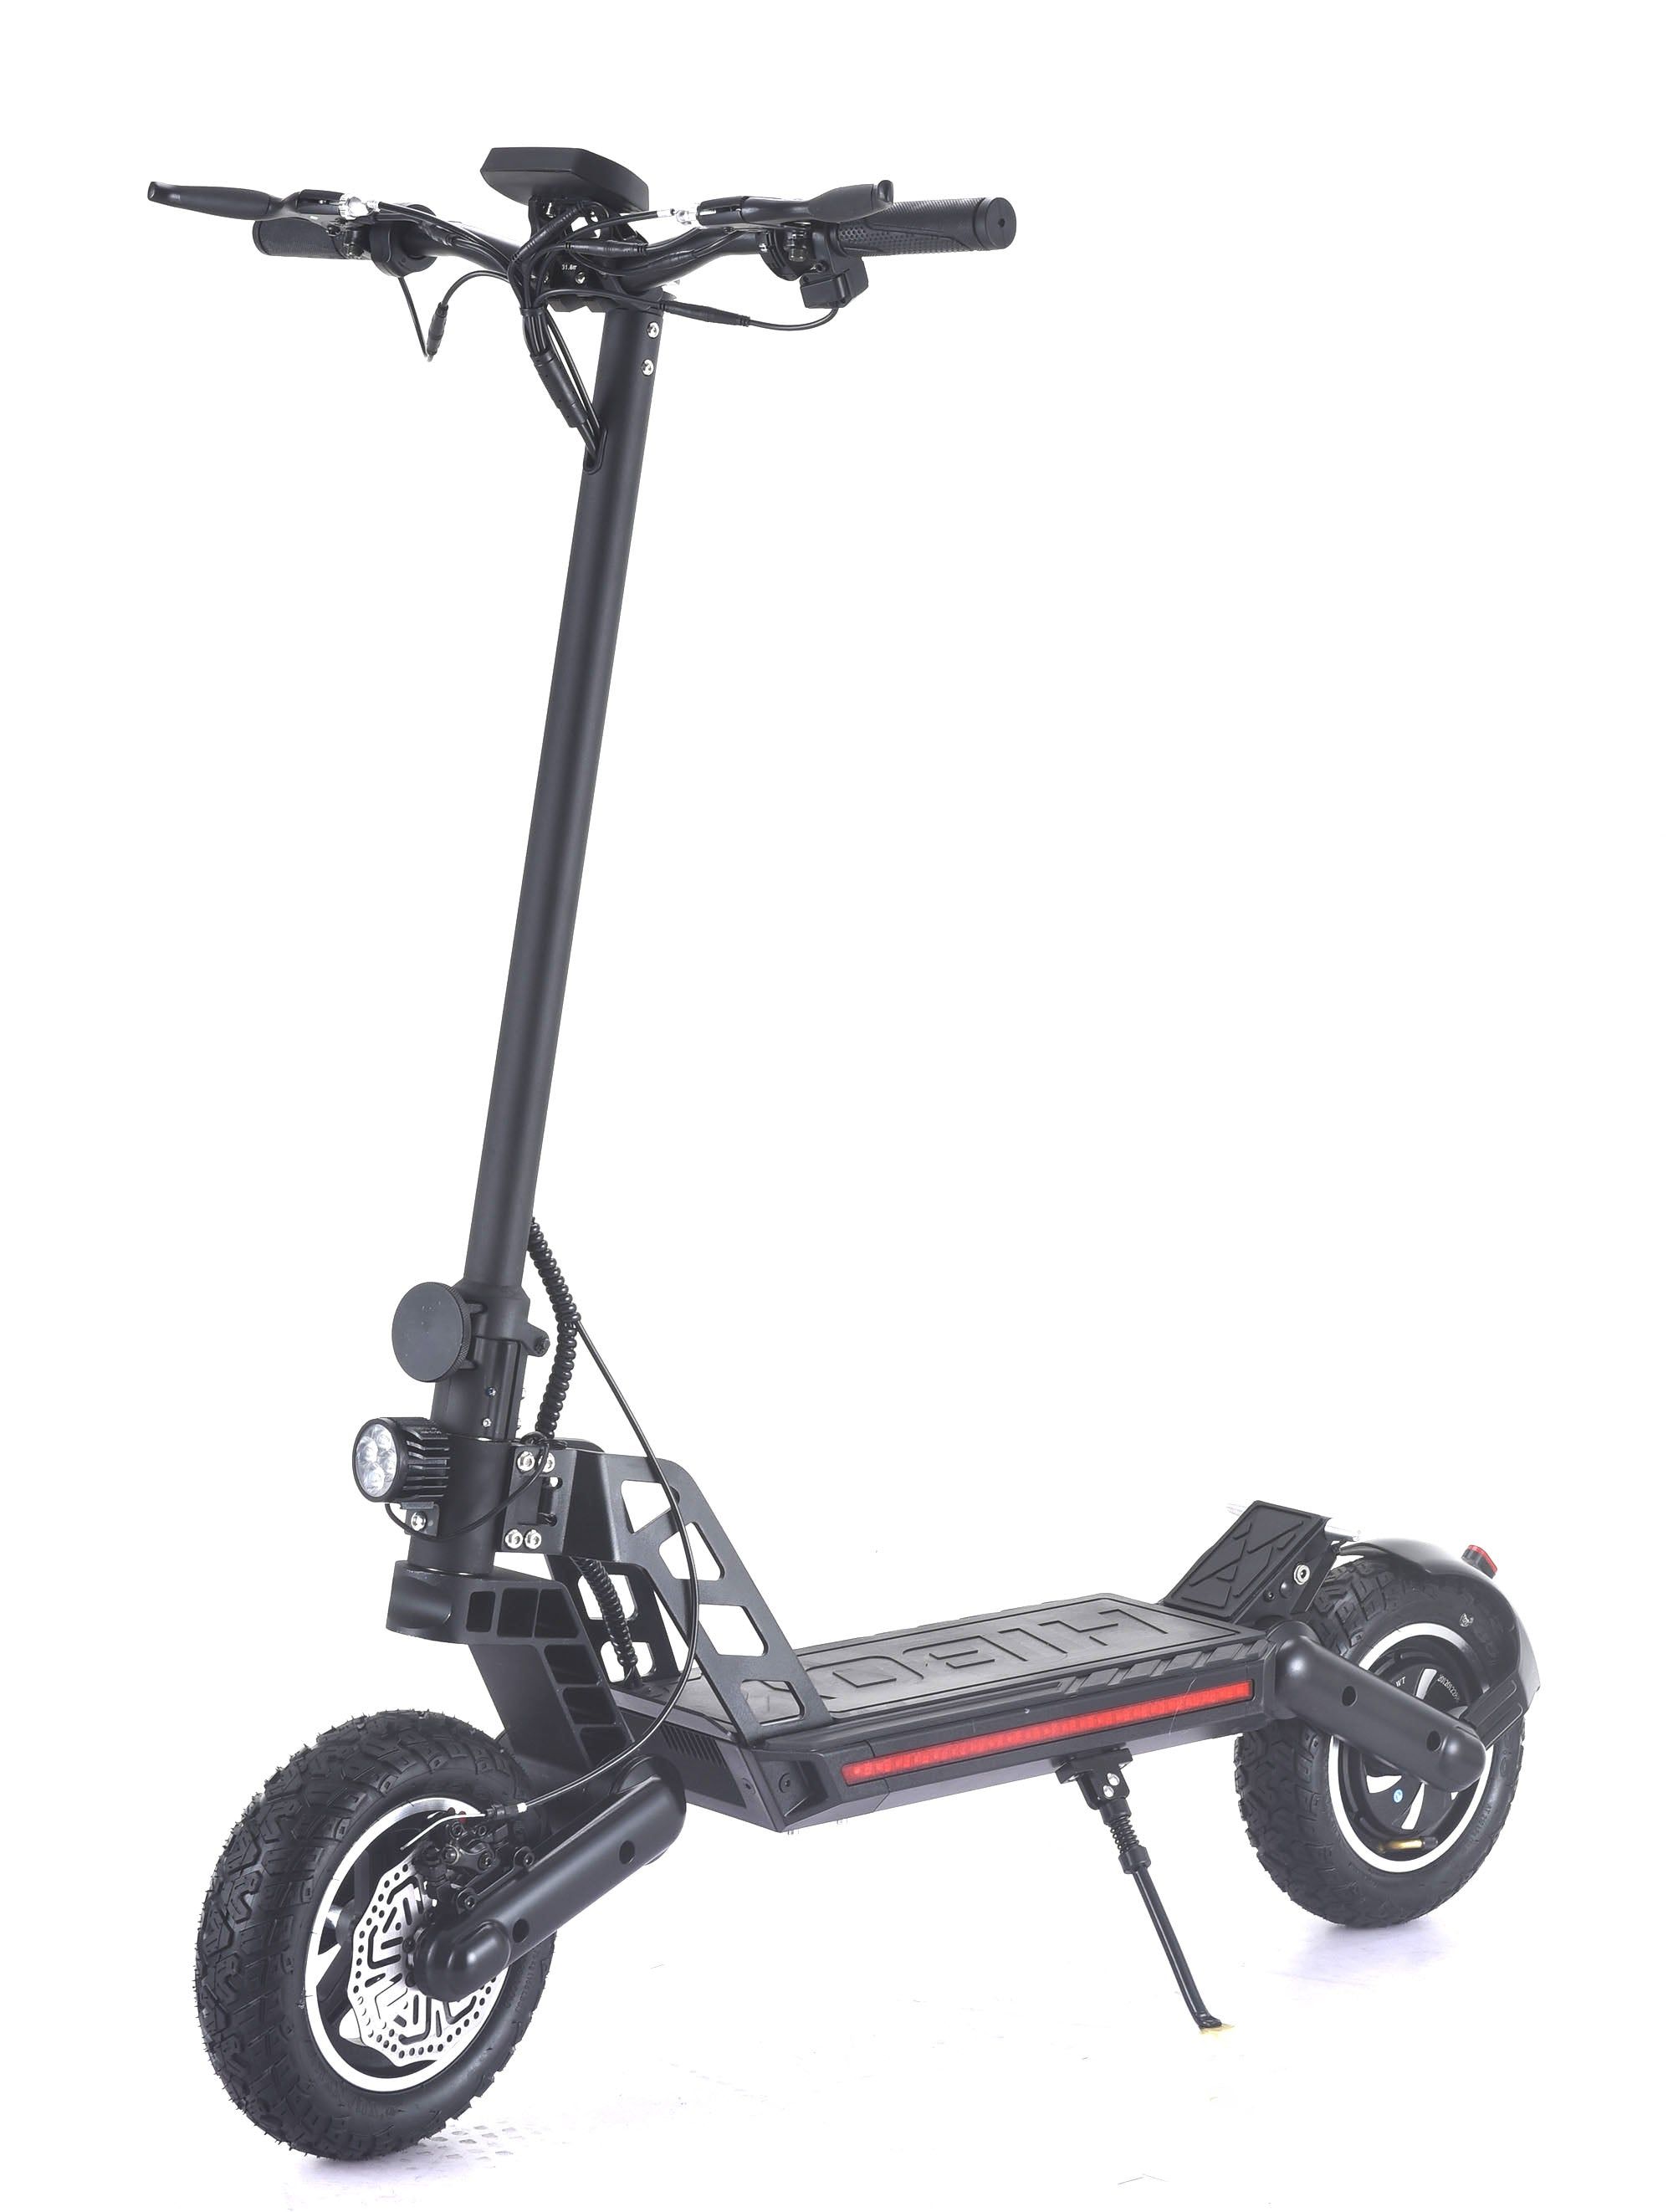 48V Freddo G2 E-Scooter. 800W motor, Shock absorbers, turn signal light and brake lights, 26 mph Kids Cars CA - Ride On Toys Store